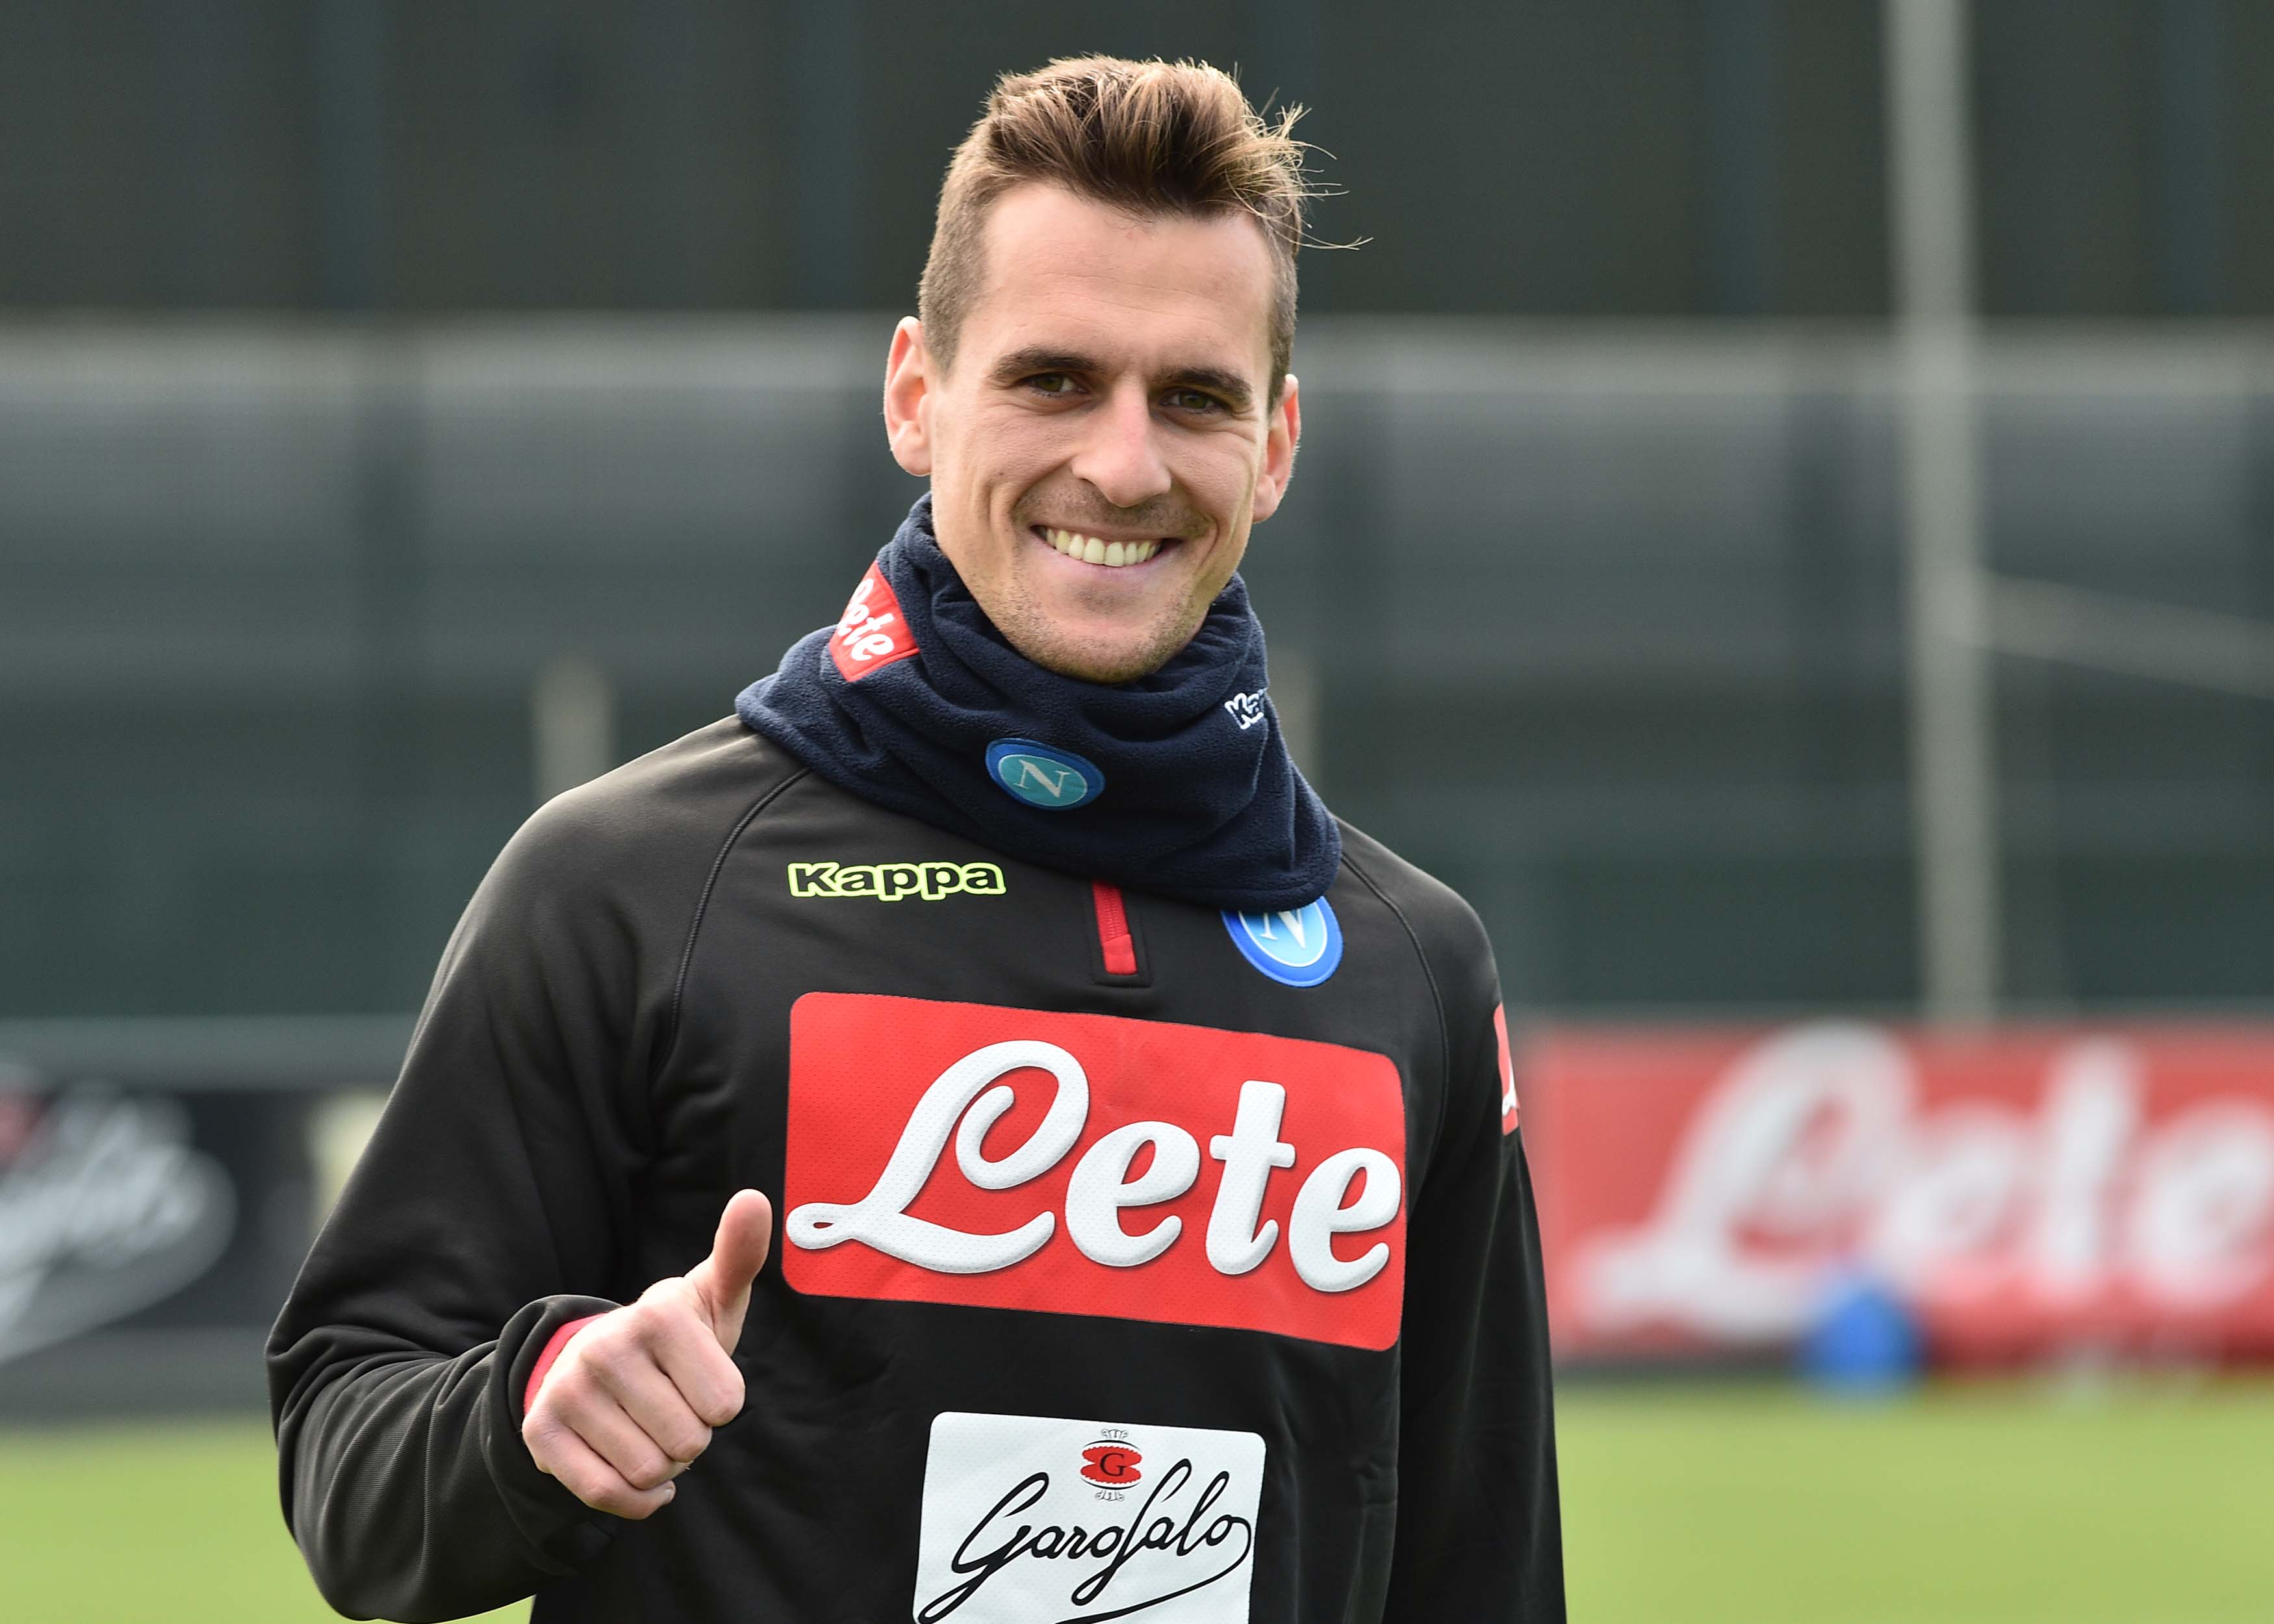 NAPLES, ITALY - MARCH 28: Arkadiusz Milik during an SSC Napoli Training Session on March 28, 2019 in Naples, Italy. (Photo by Ciro Sarpa SSC NAPOLI/SSC NAPOLI via Getty Images)